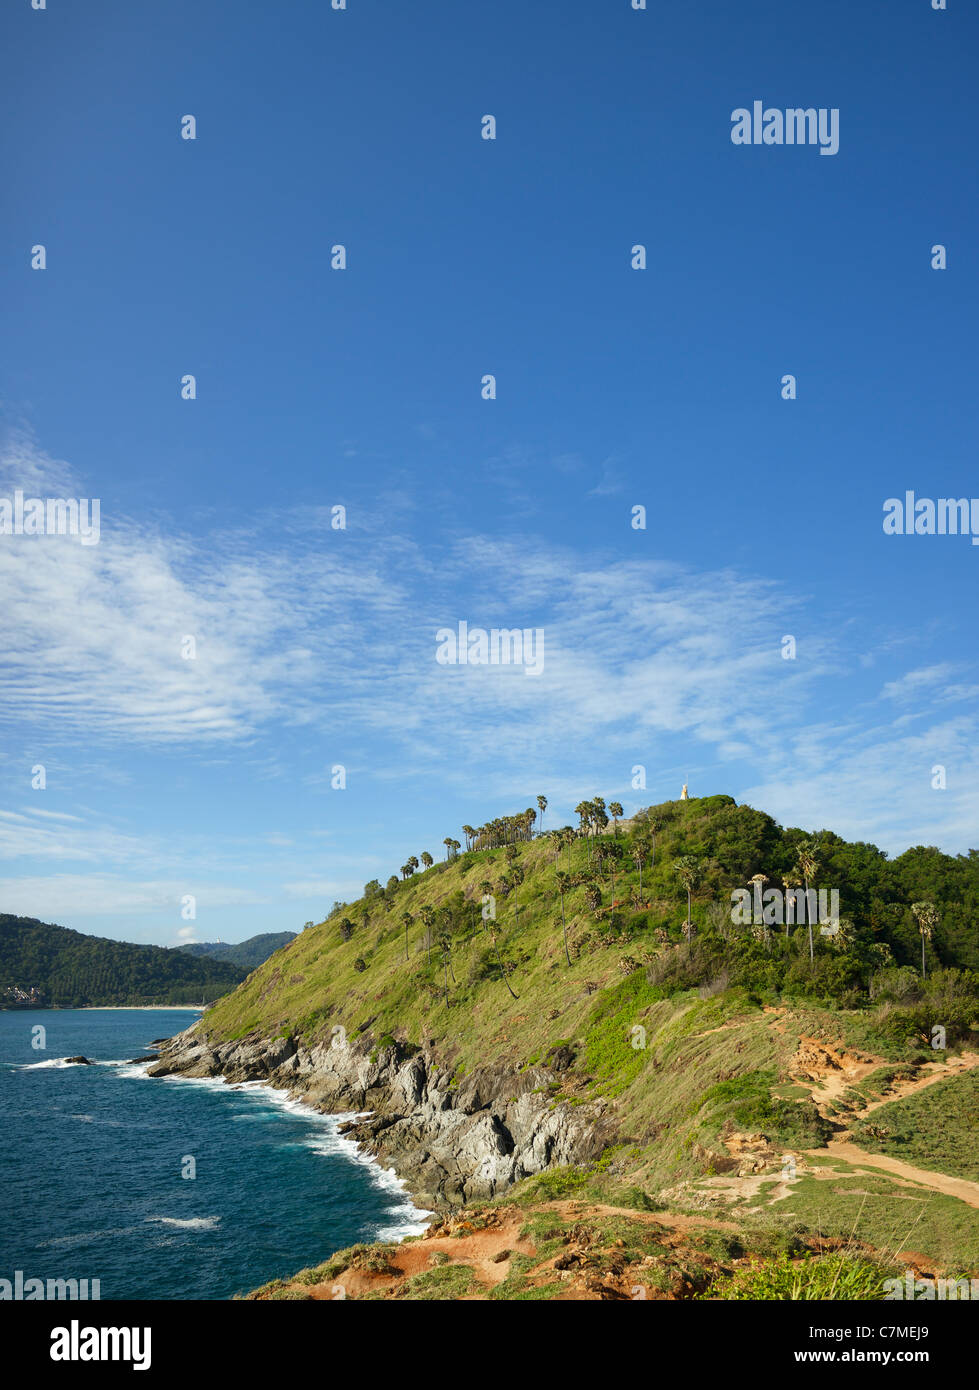 View of a Promthep cape in the evening. Vertical composition in high resolution. Stock Photo